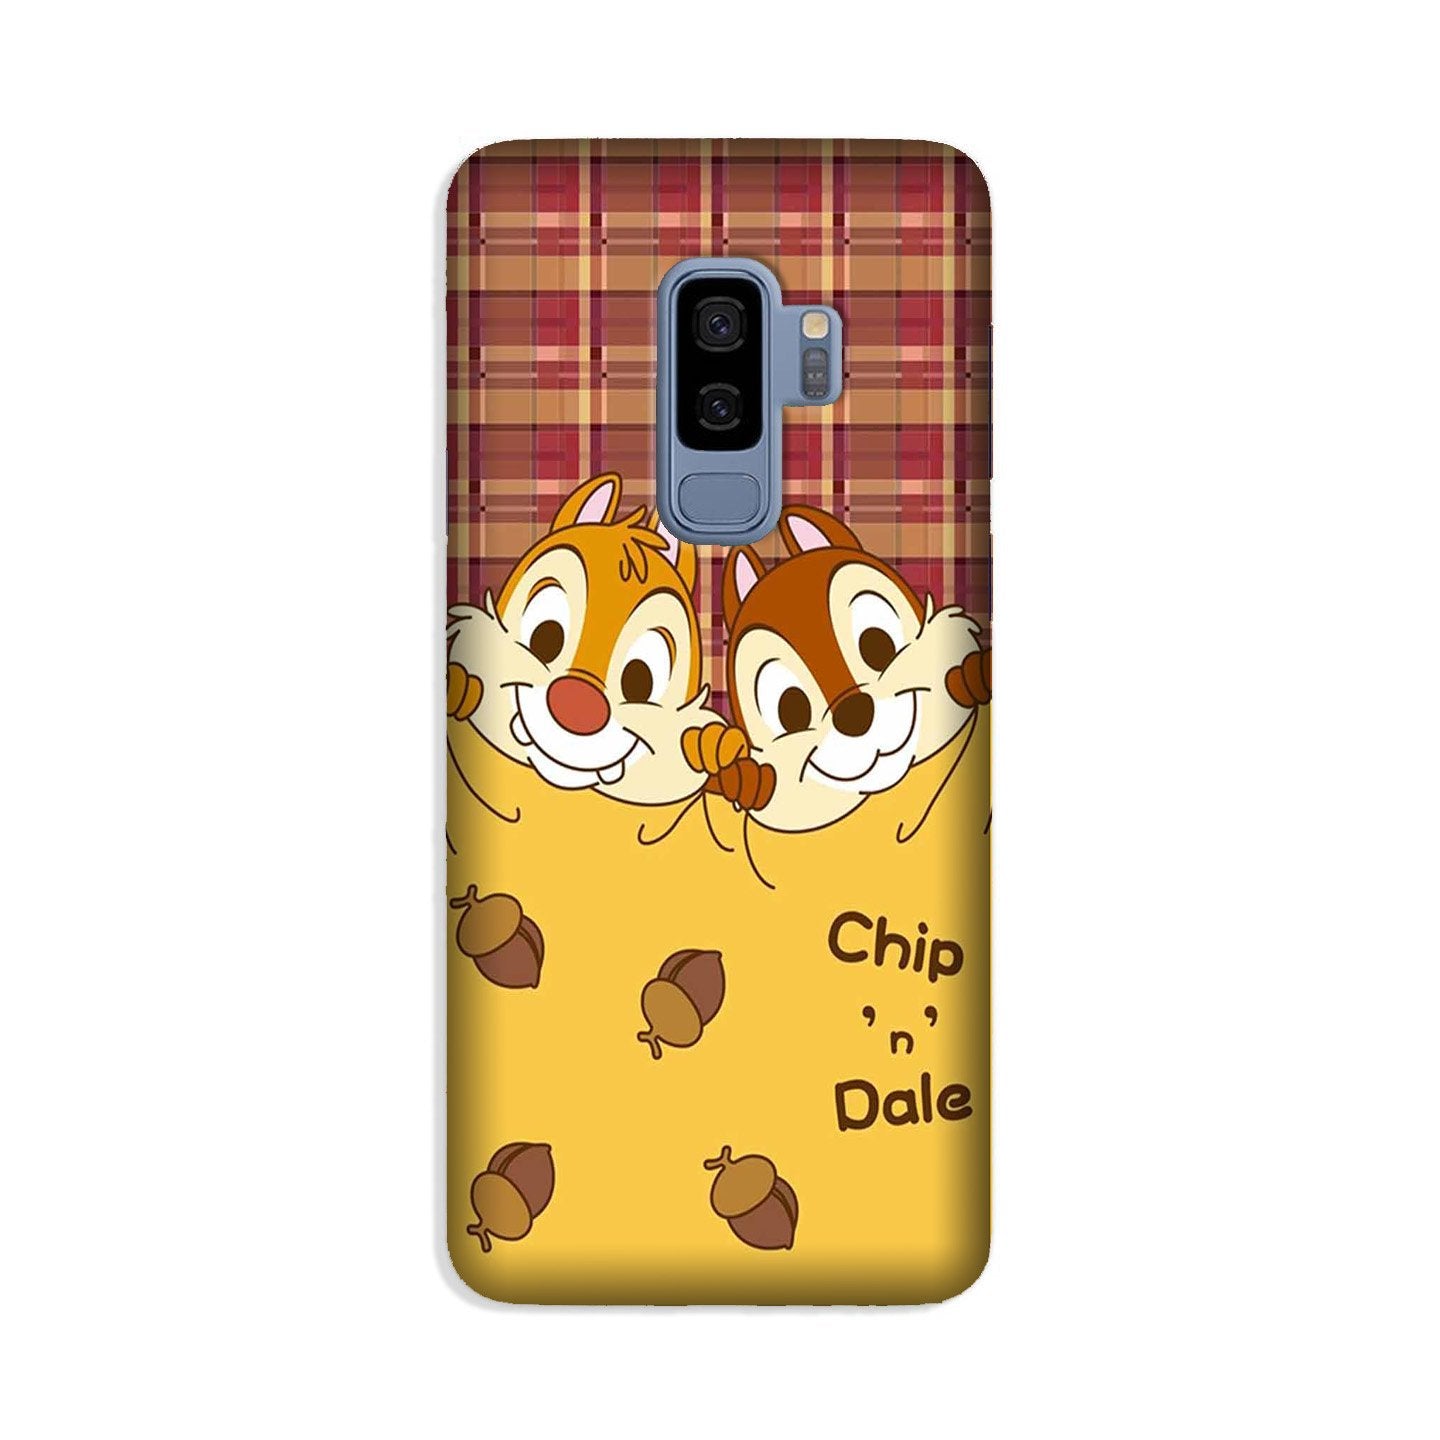 Chip n Dale Mobile Back Case for Galaxy S9 Plus(Design - 342)